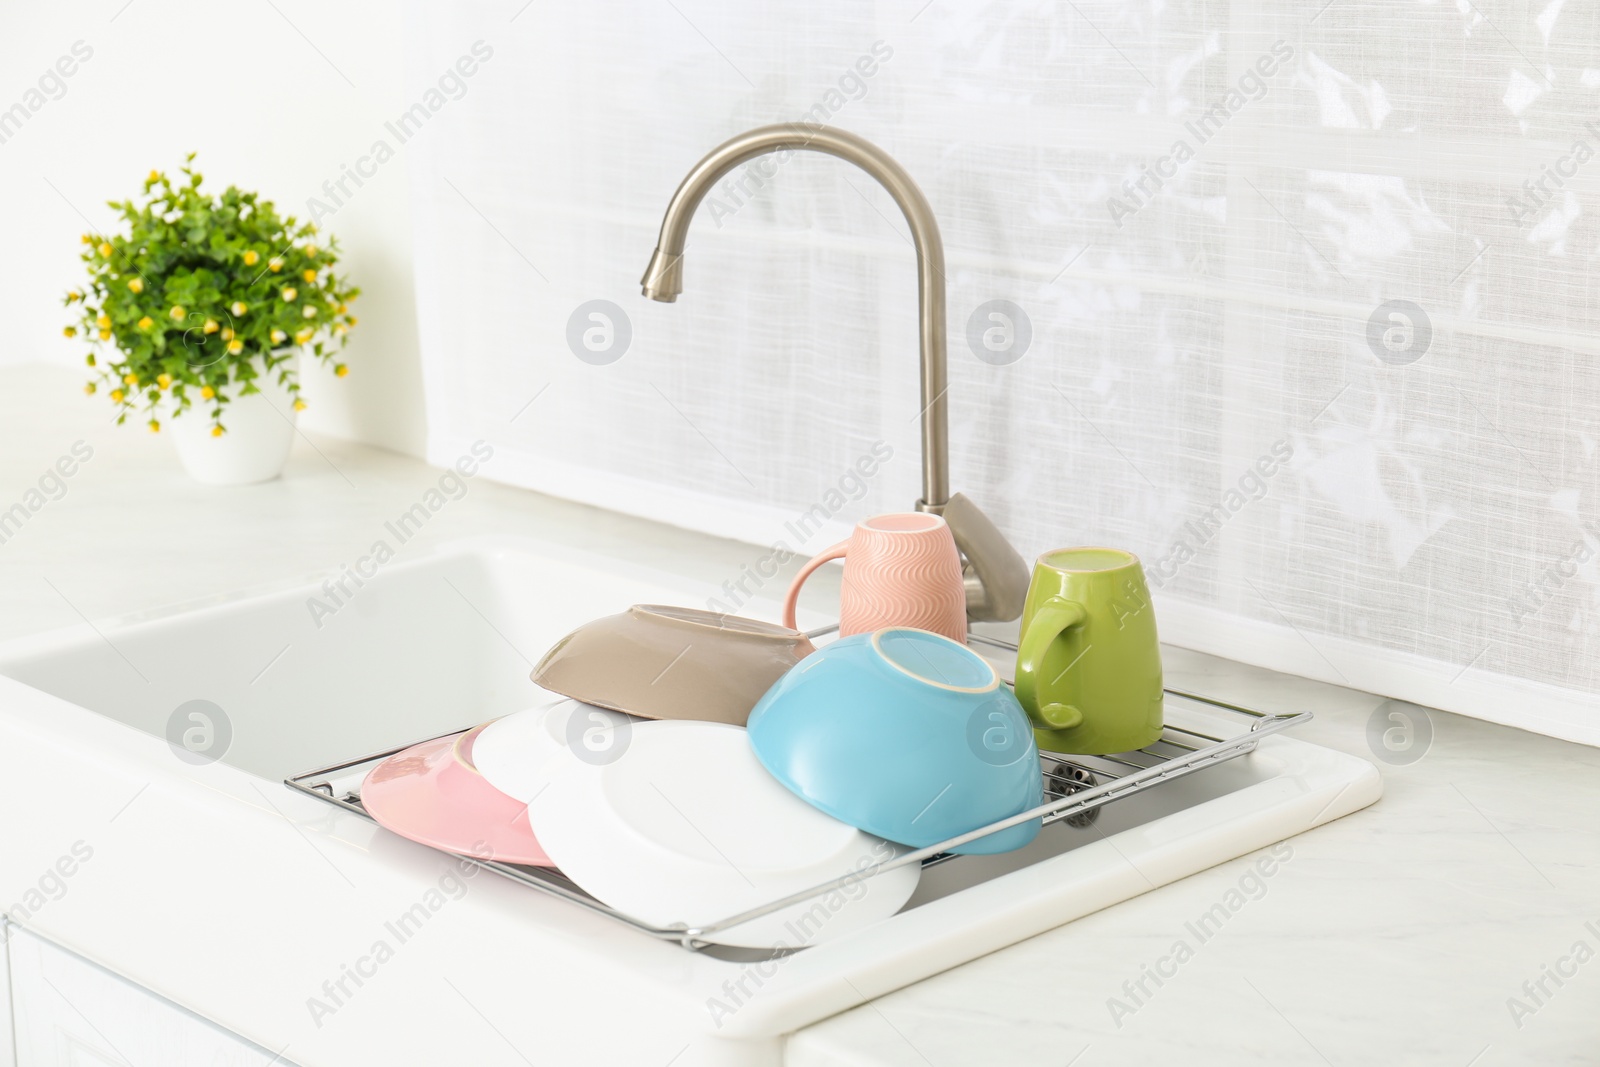 Photo of Drying rack with clean dishes over sink in kitchen